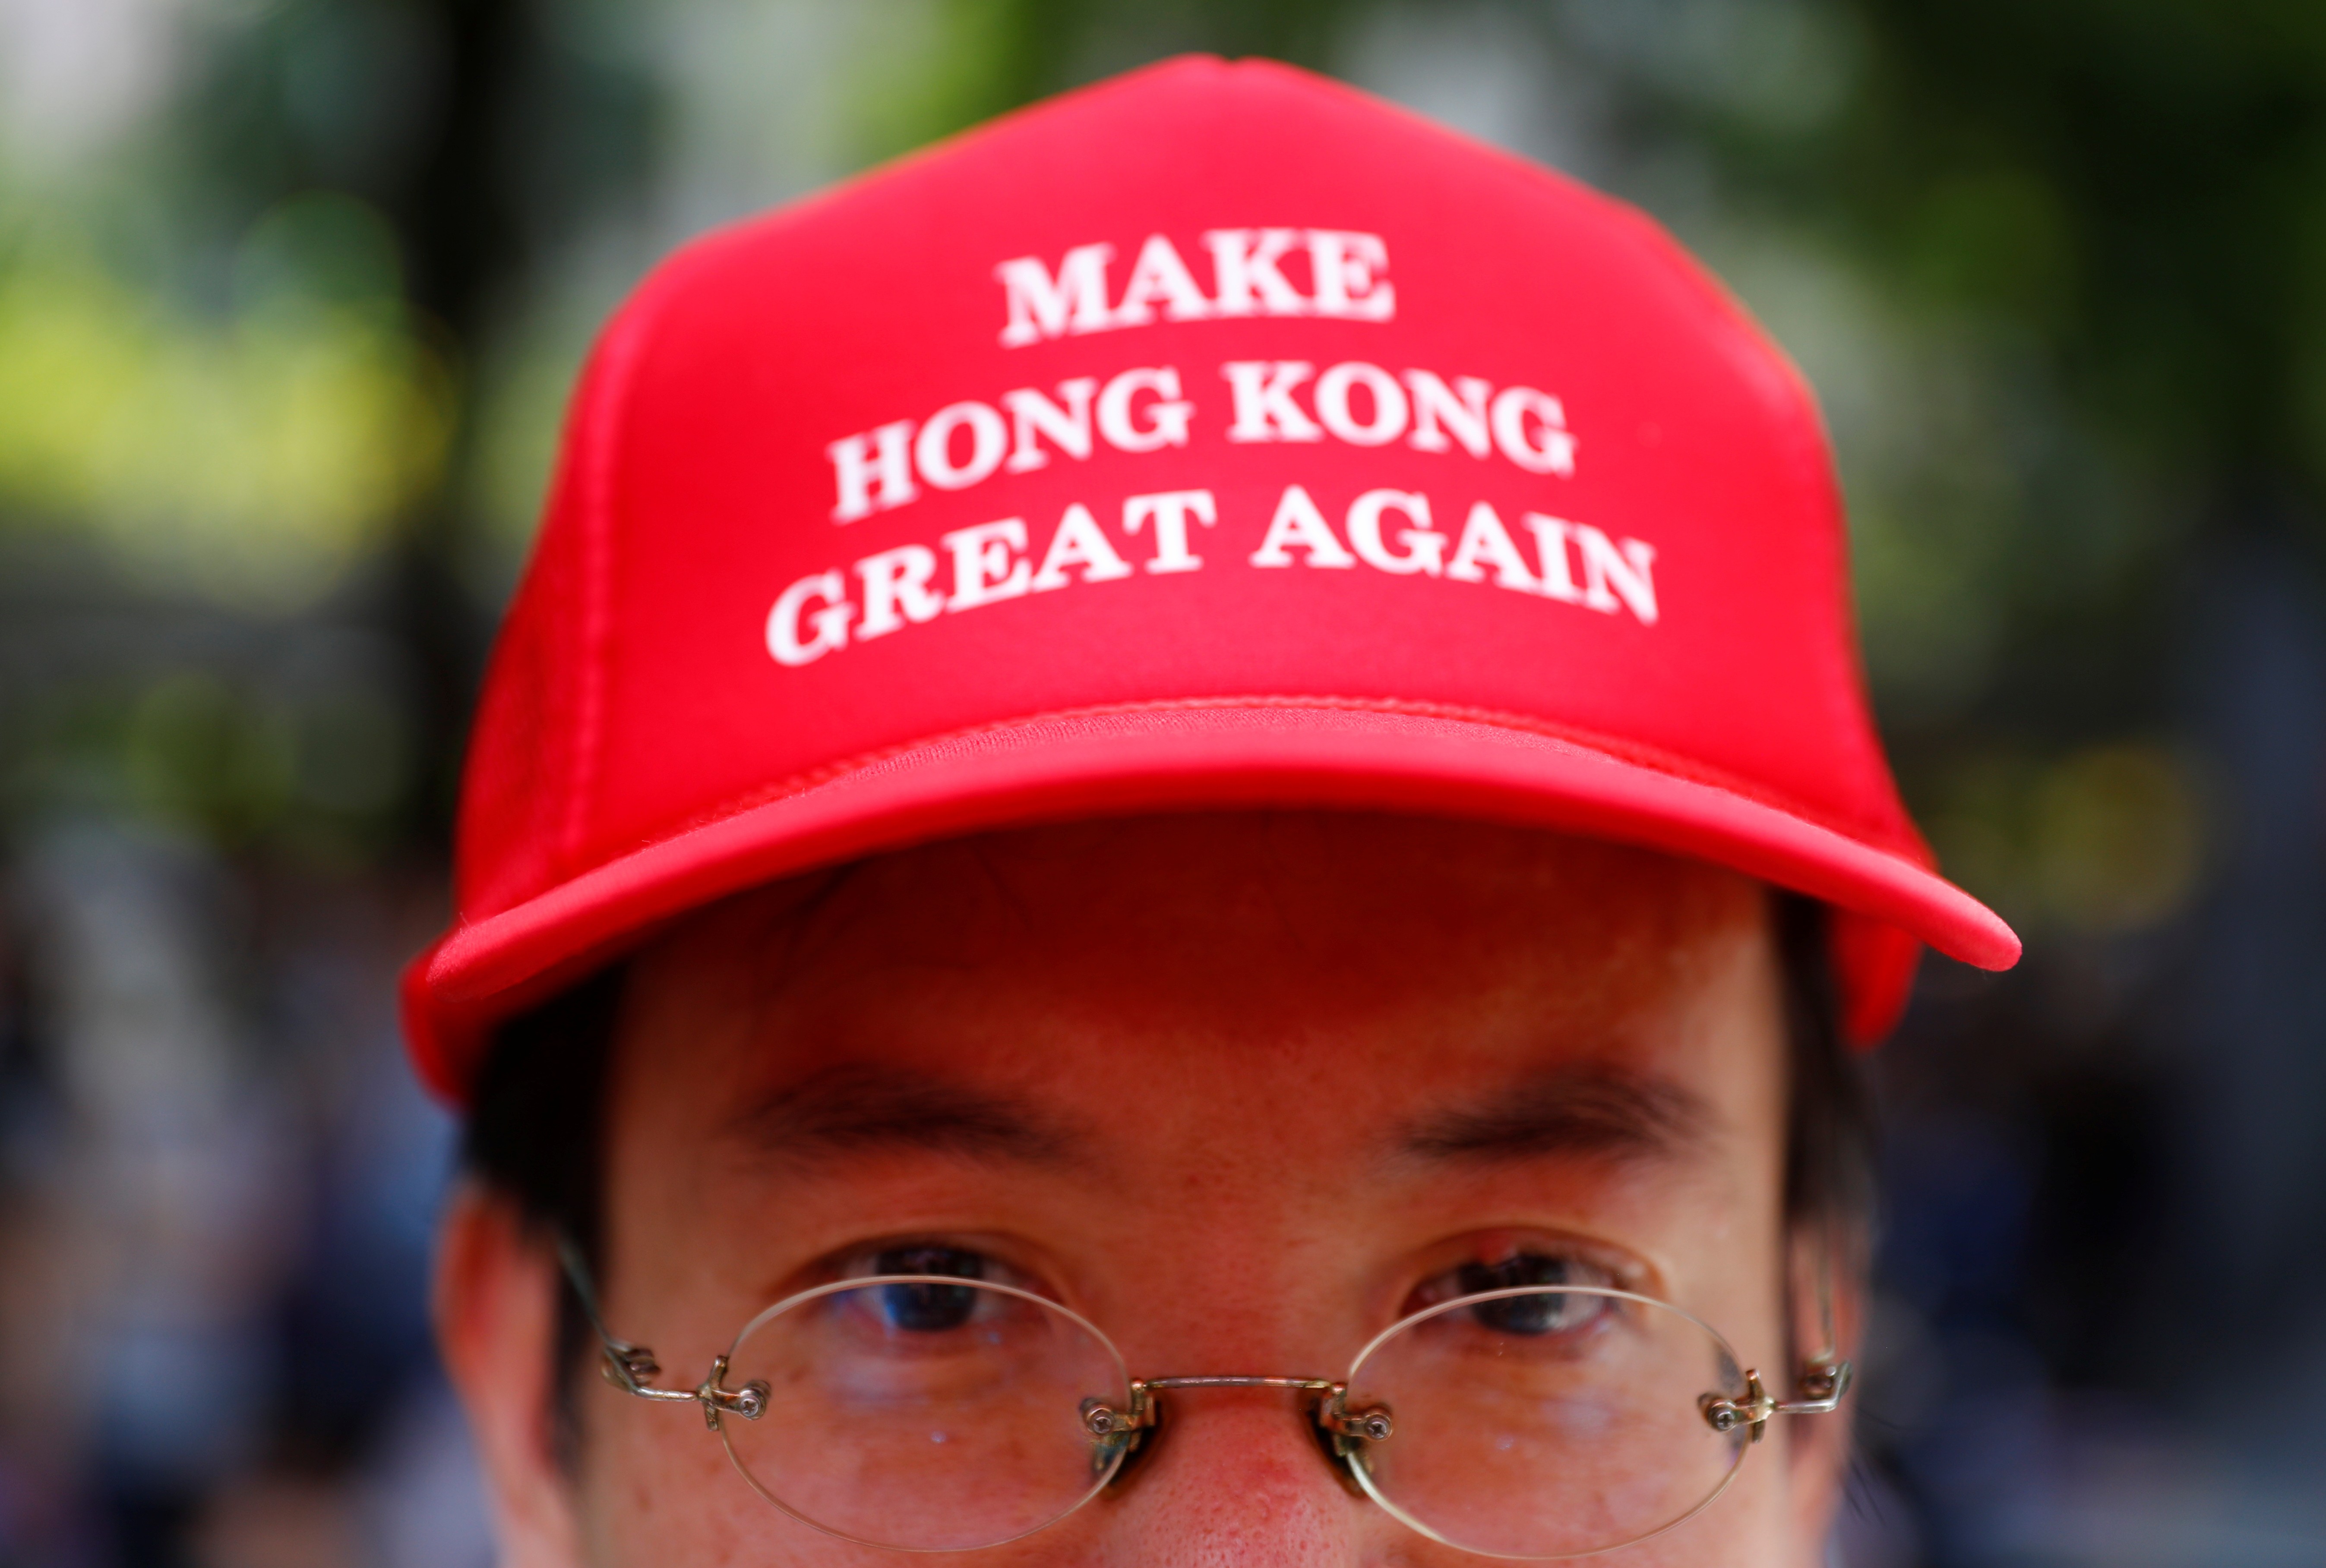 A protester wearing a cap that reads ‘Make Hong Kong Great Again’ in Central, Hong Kong, on September 8, 2019. Photo: Reuters